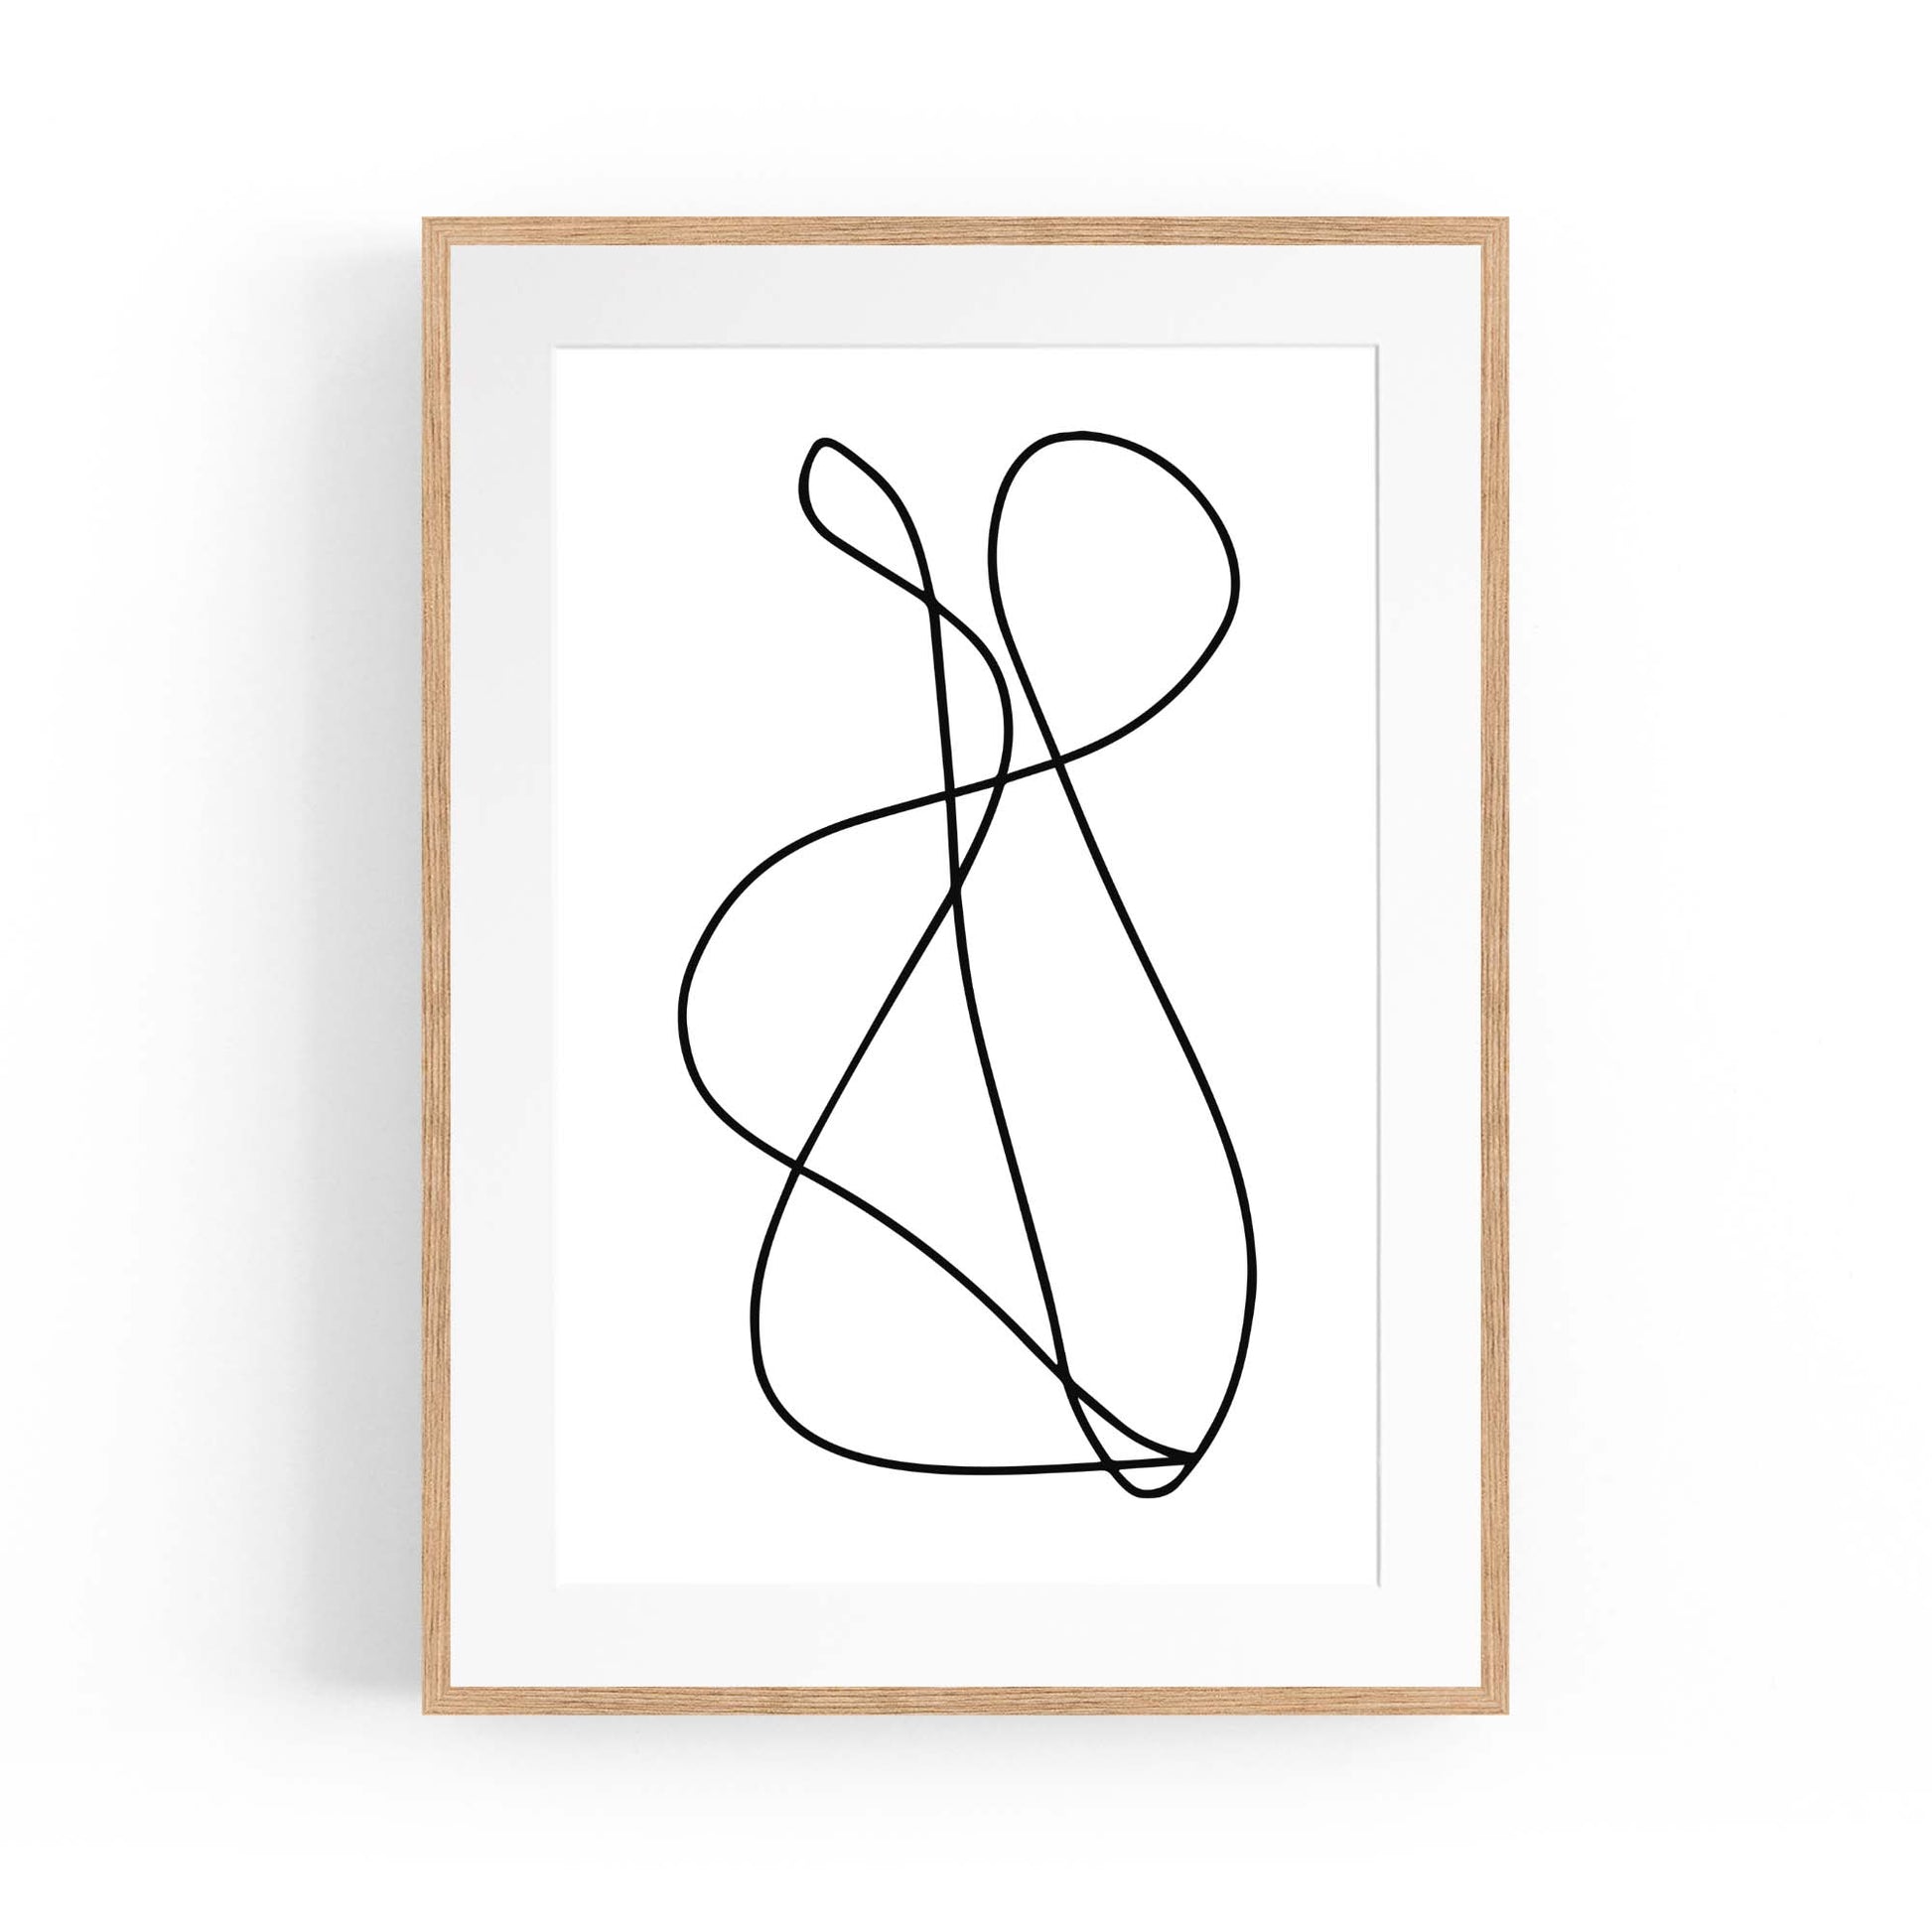 Minimal Abstract Modern Line Artwork Wall Art #8 - The Affordable Art Company